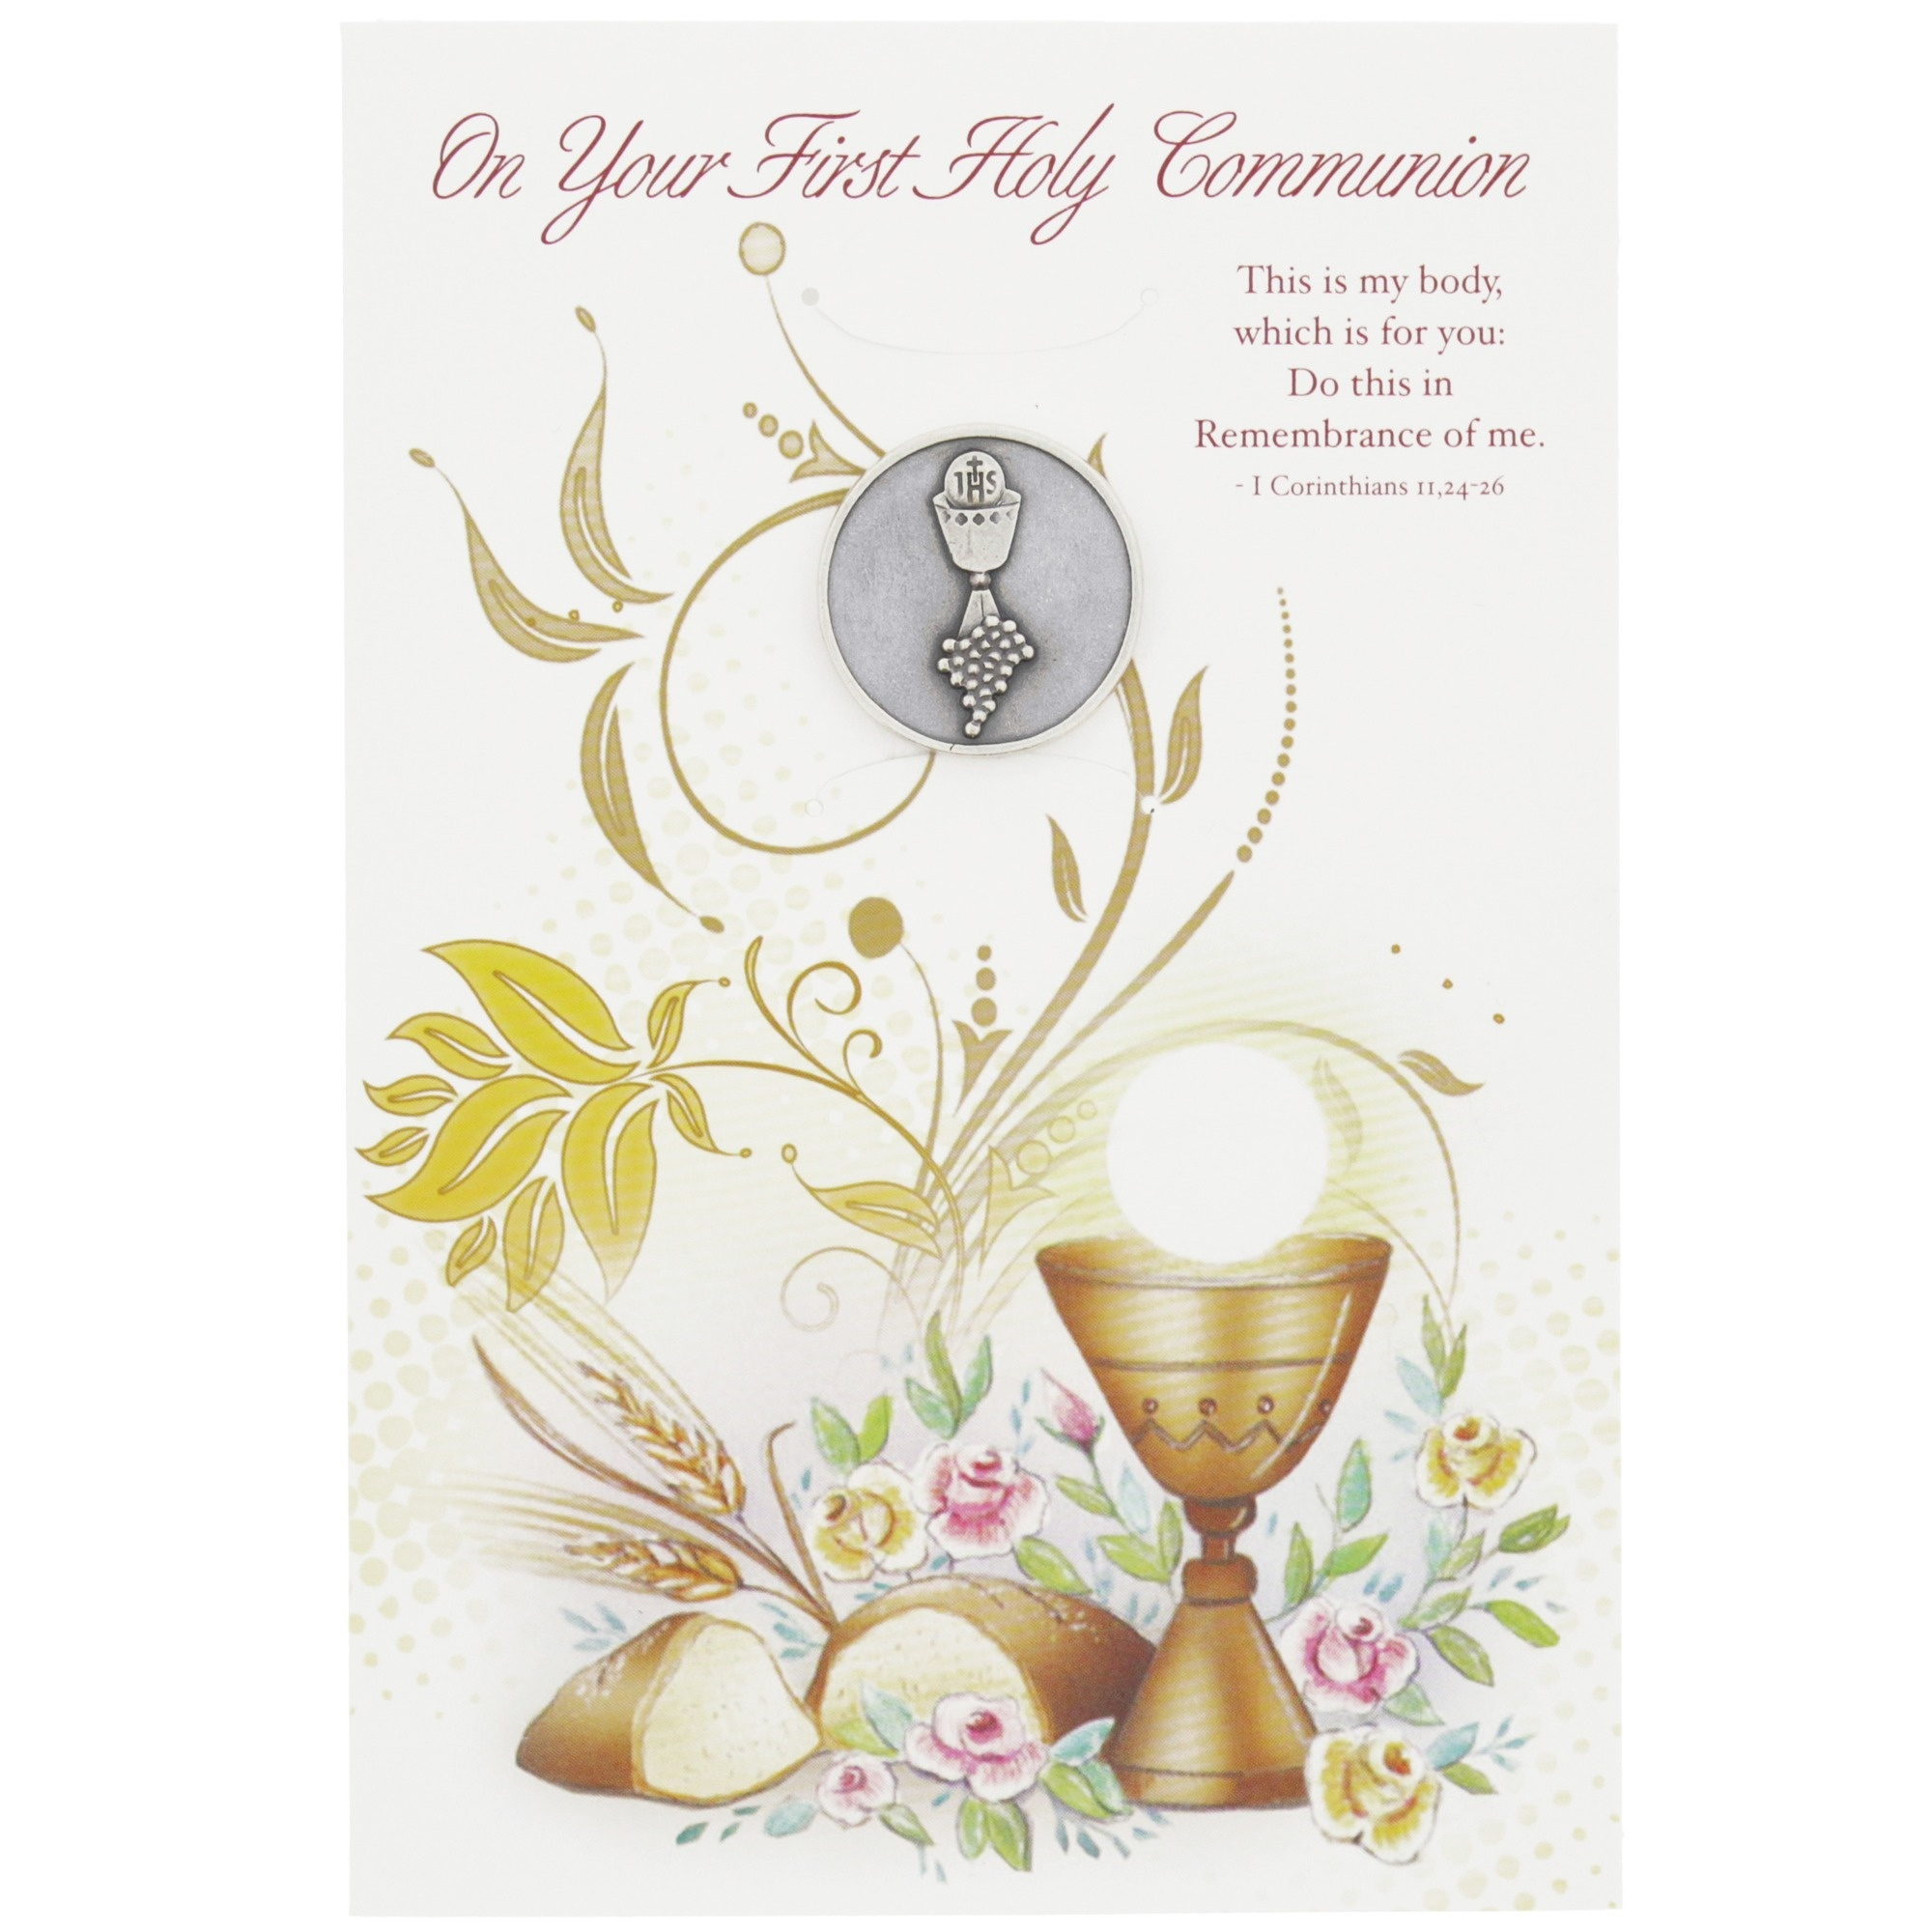 First Holy Communion Cards Printable Free Rossy Printable